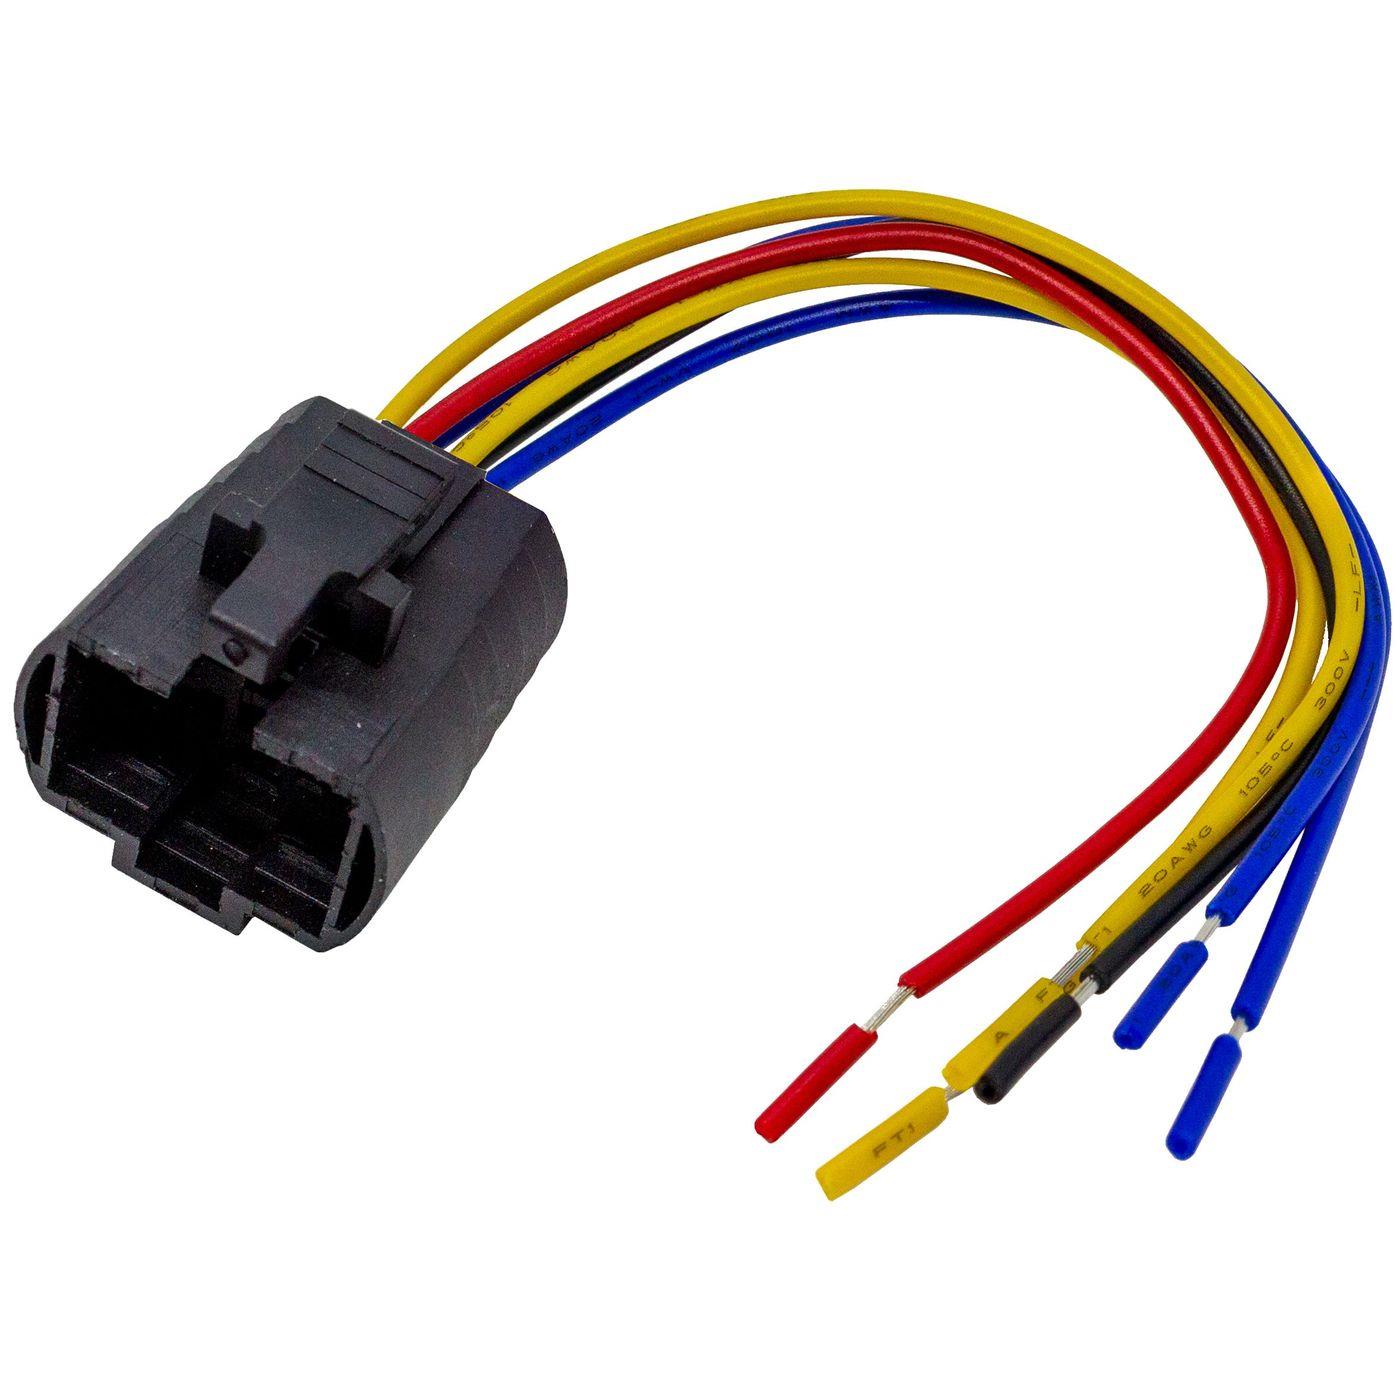 Connectors for 25mm Push button Switch 6x 0,5mm² Cable length: 140mm